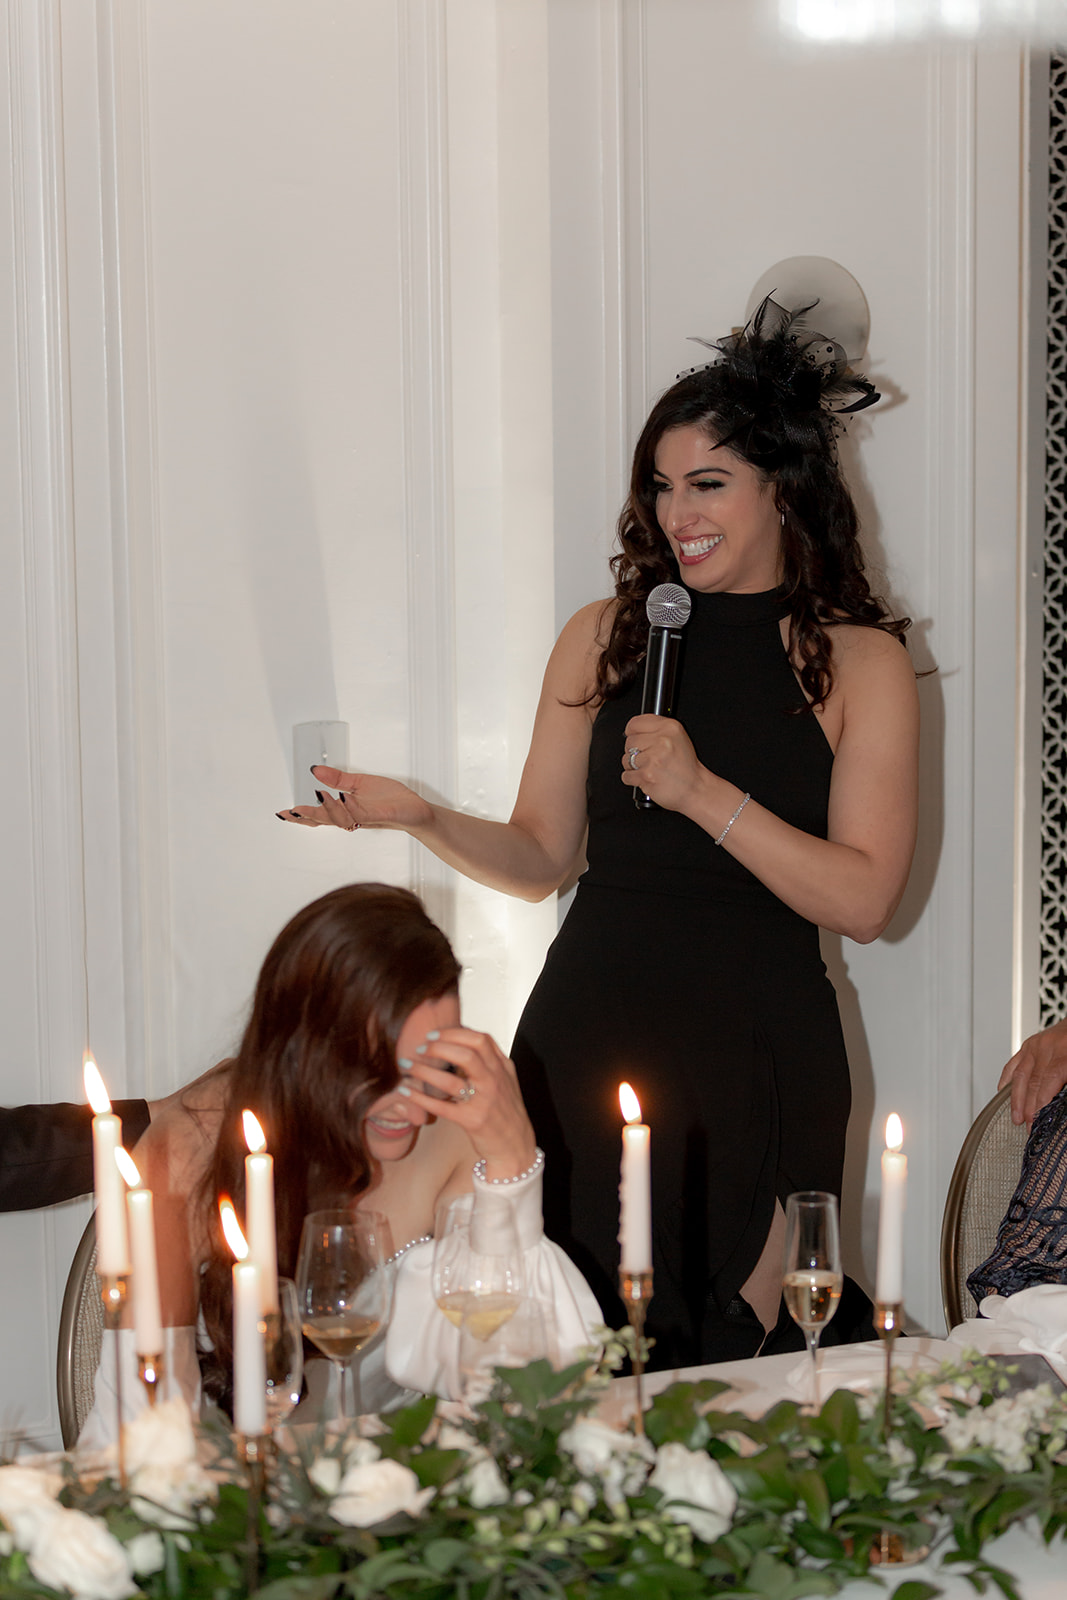 Wedding guest holding speech standing behind bride. bride is laughing.